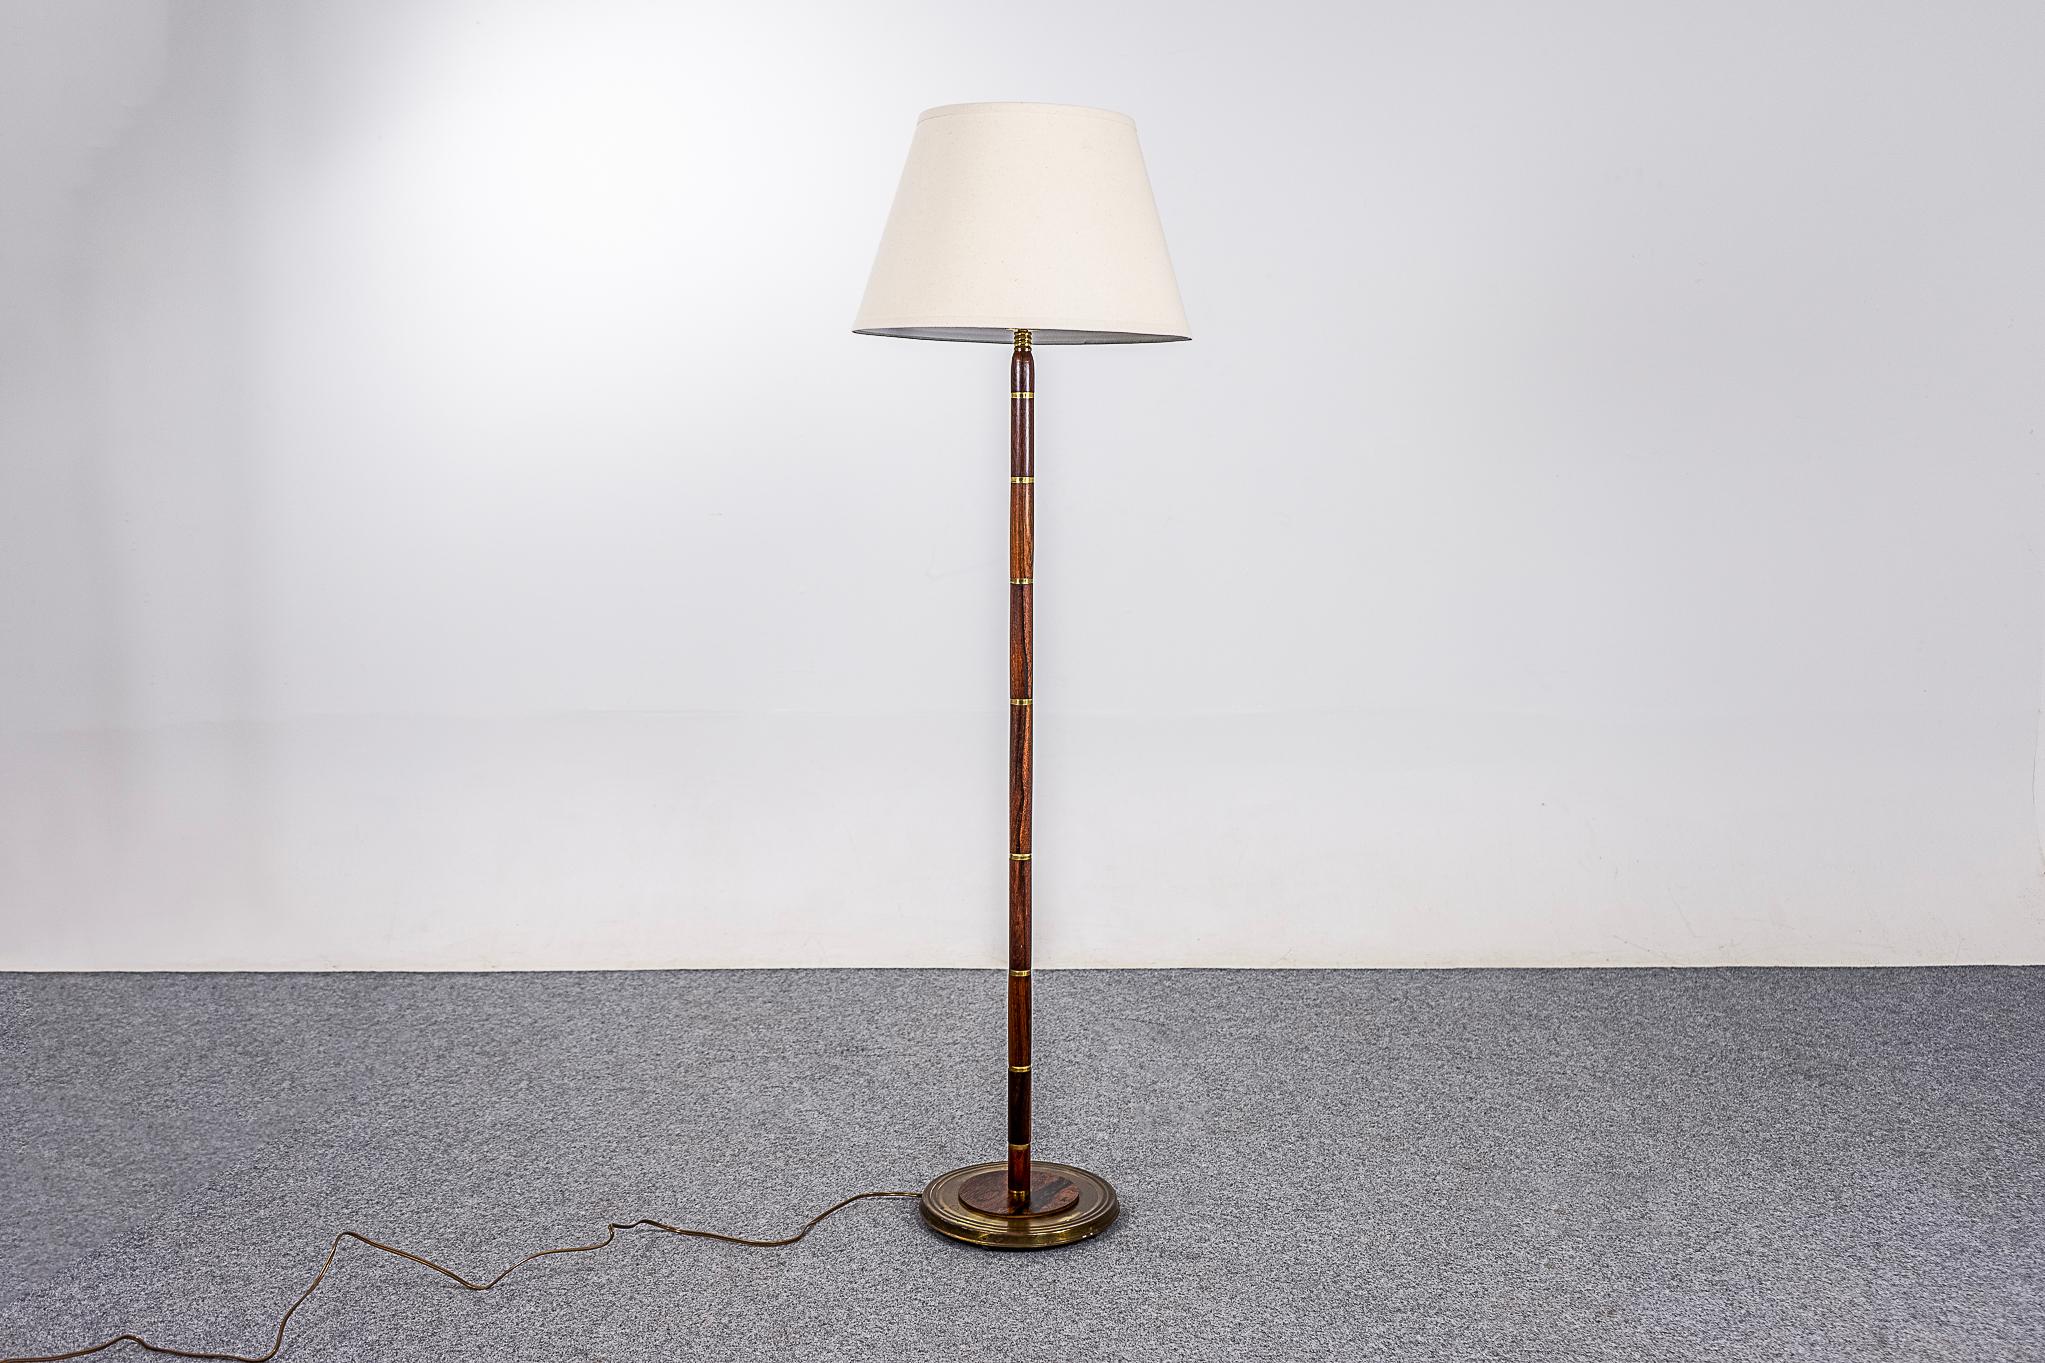 Rosewood and brass Danish floor lamp, circa 1960's. Beautiful solid rosewood construction with metal accents. Custom, quality fabric shade. All new electrical, updated tri-light socket with 3 brightness levels to suit your home. Lovely warm light!